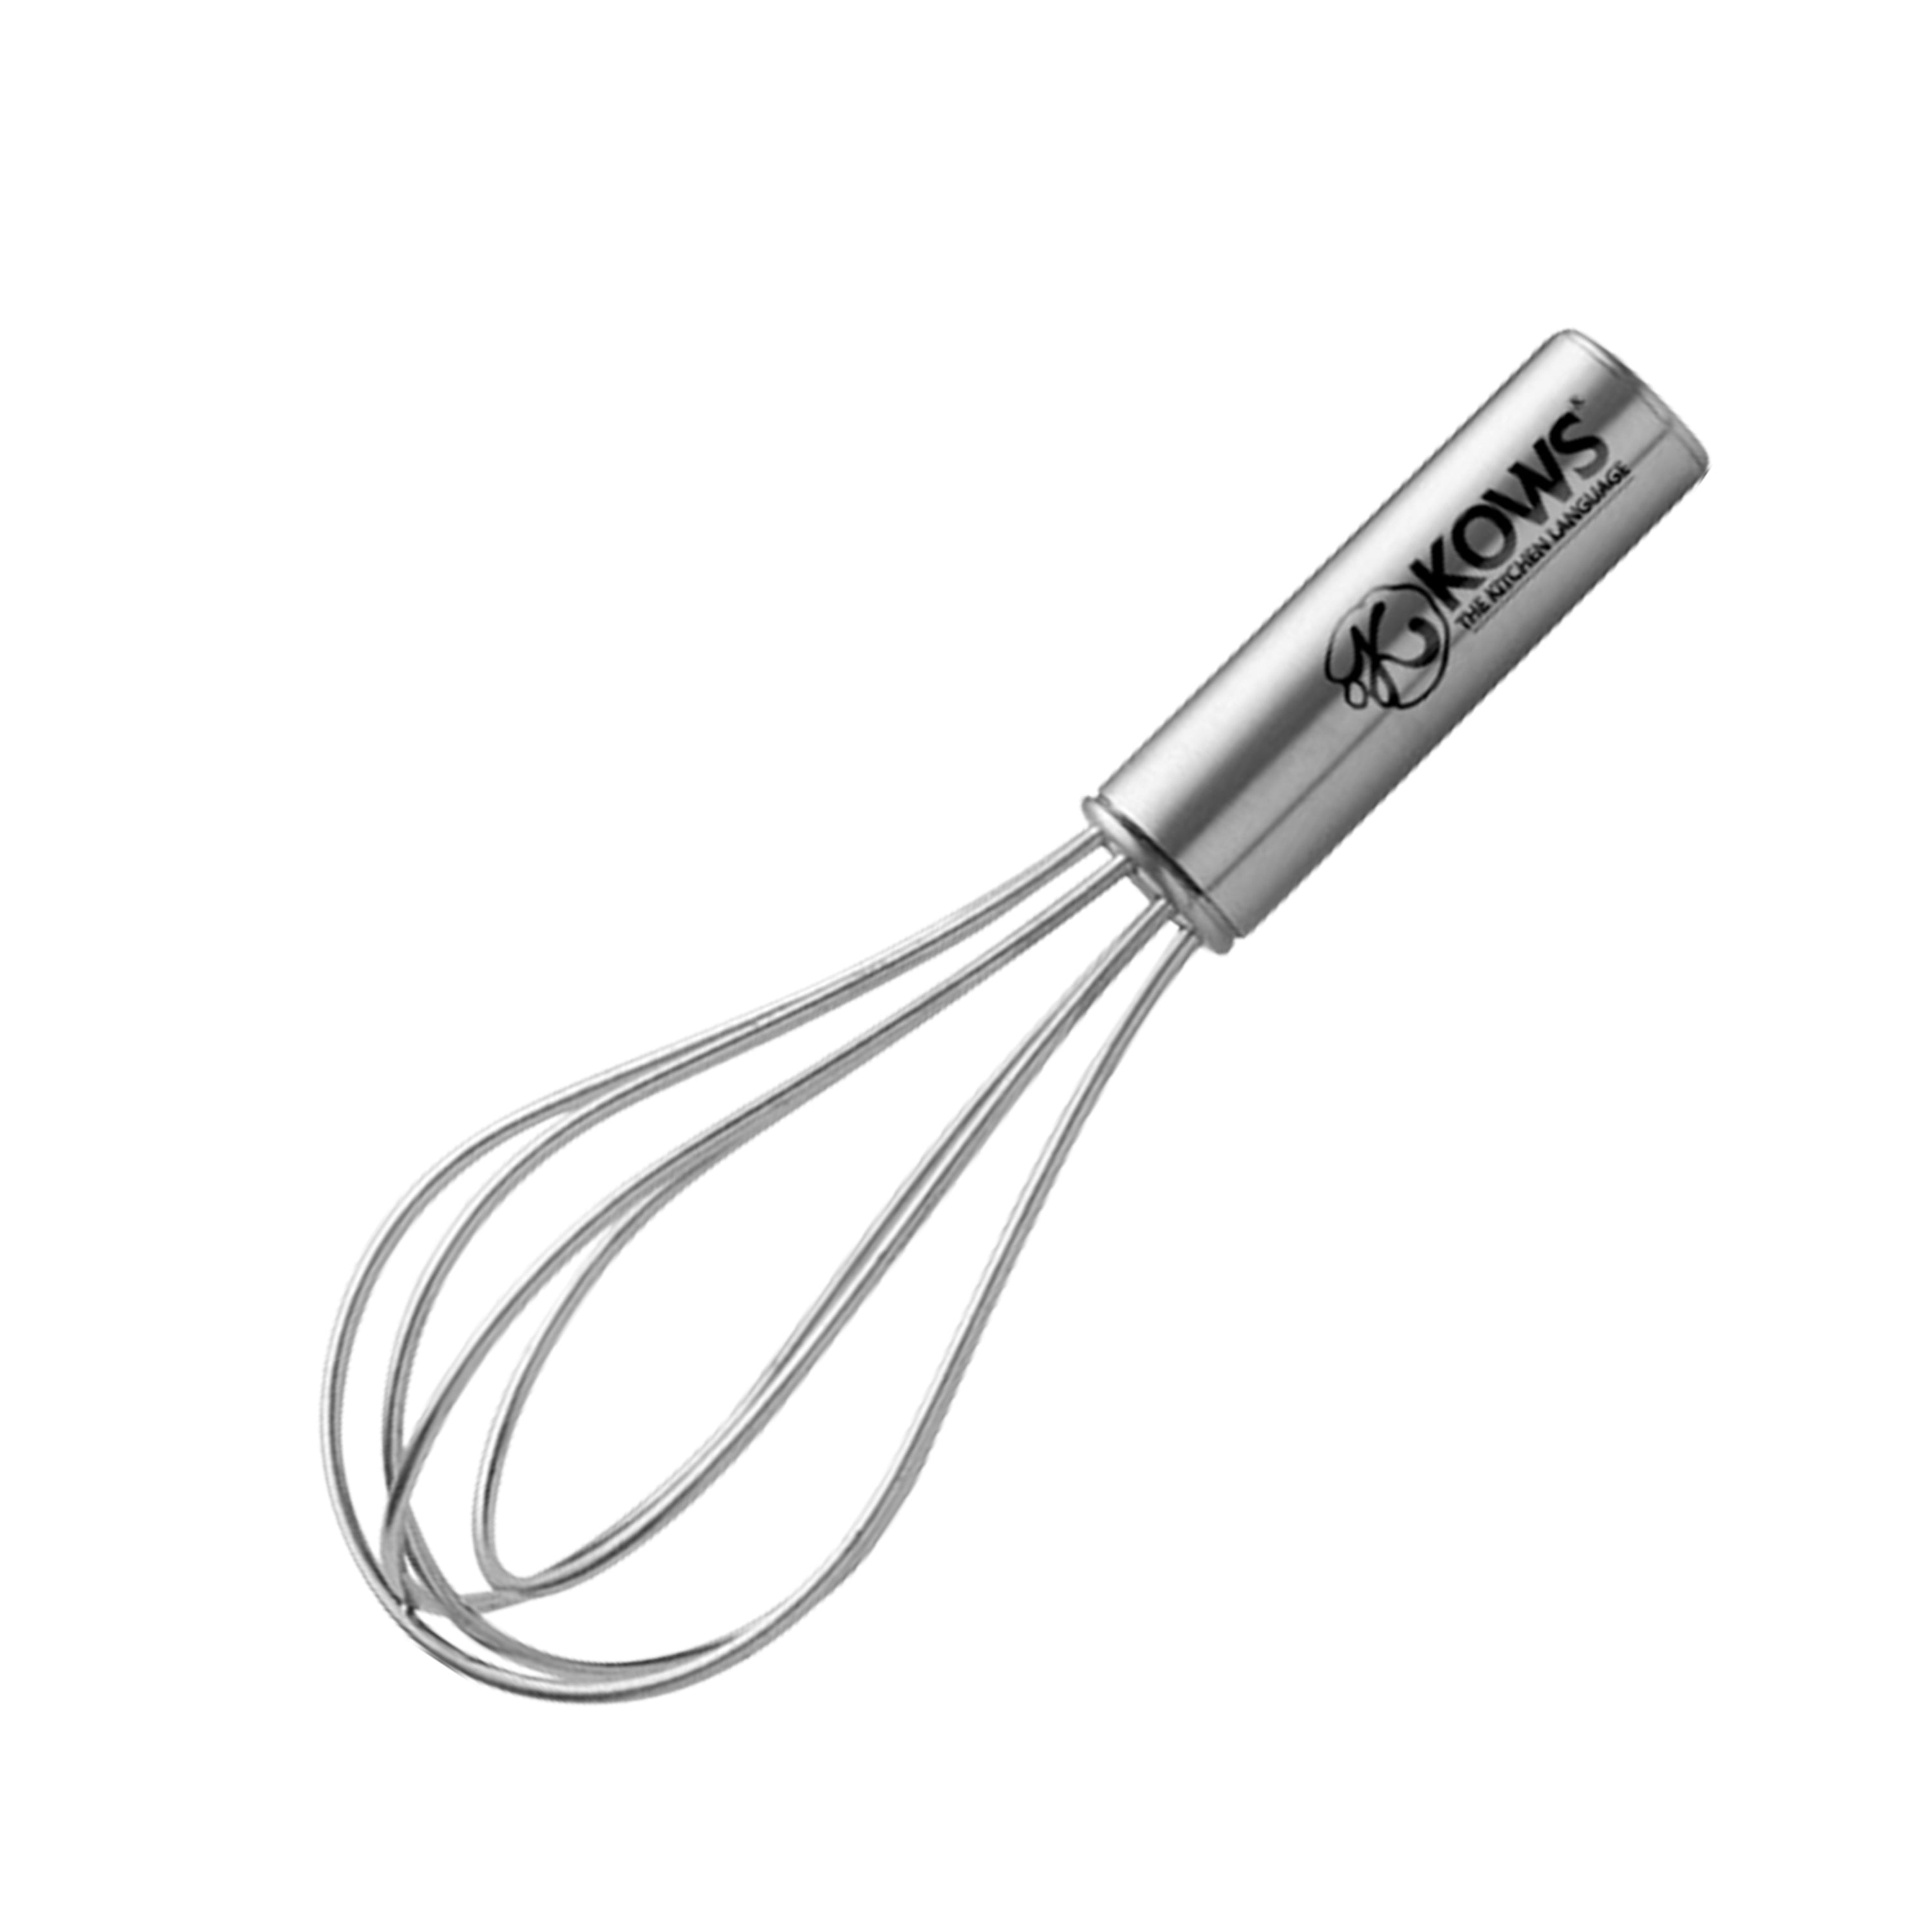 KOWS Pipe handle 1.4mm whisk 10 cm (WK003)